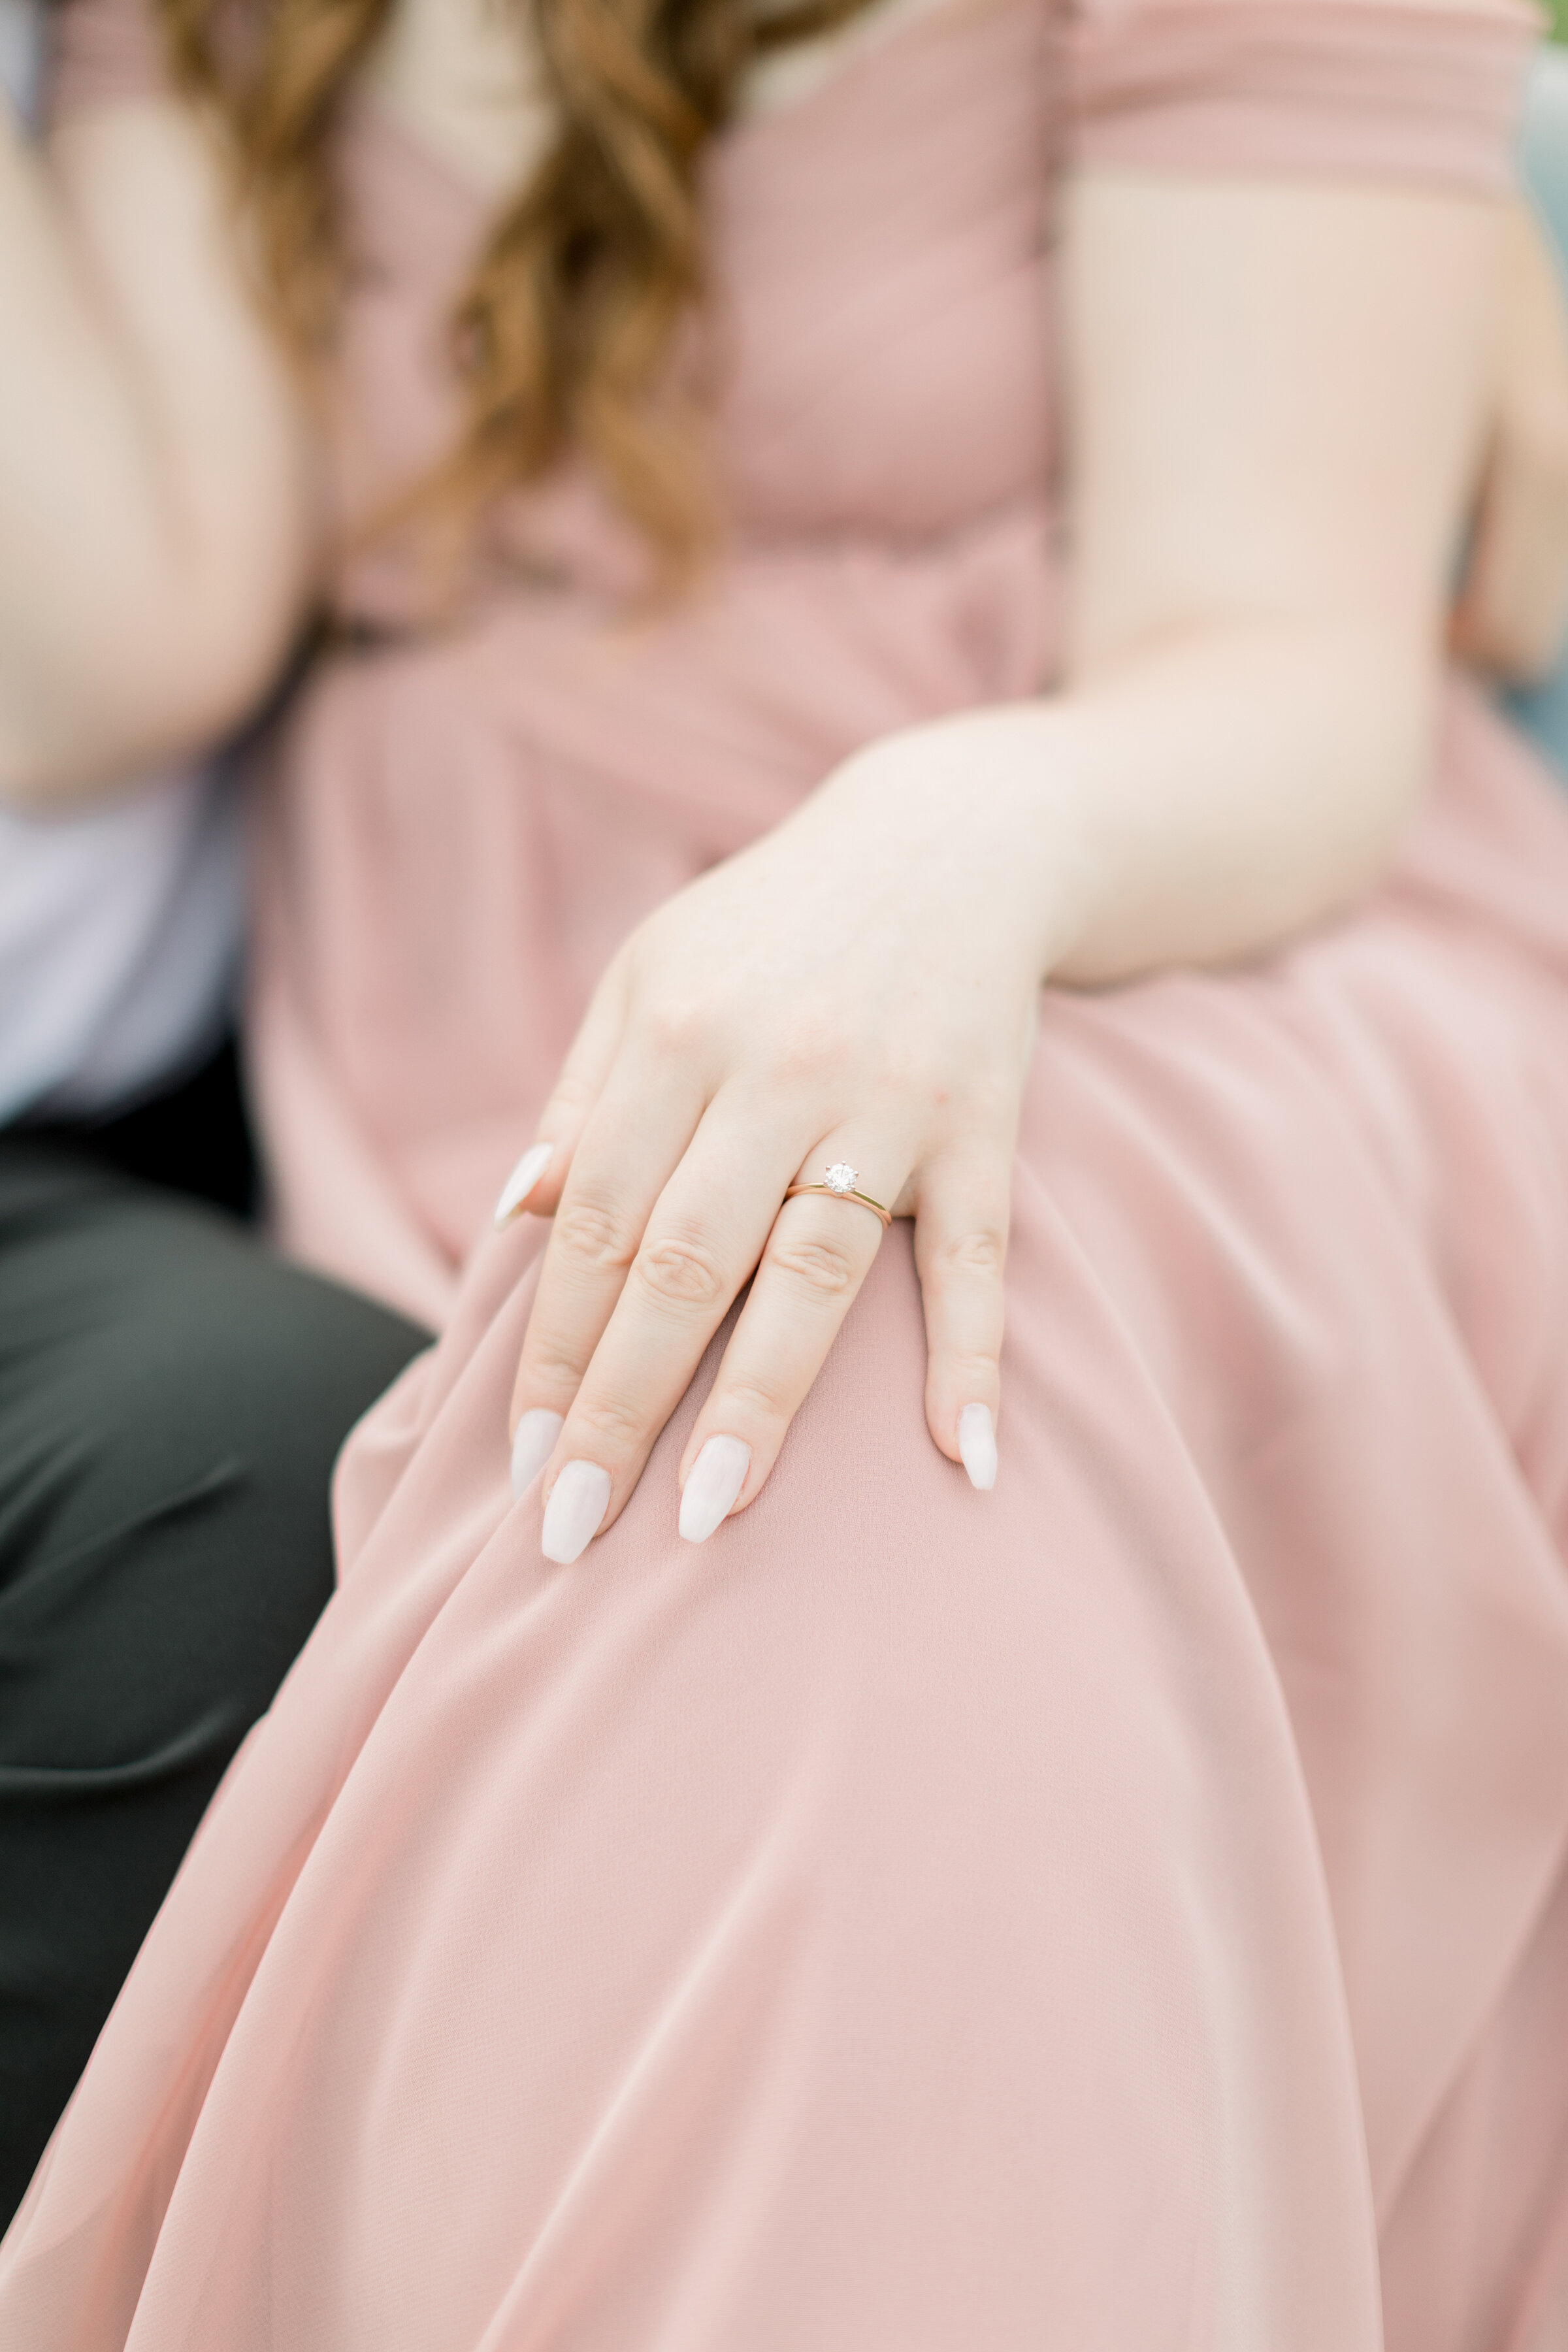  A stunning look at the engagement ring as she gently lays her hand on her dusty rose pink dress in a beautiful engagement session by professional engagement photographer Chelsea Mason Photography. Showing off the ring pose inspiration nail goals eng